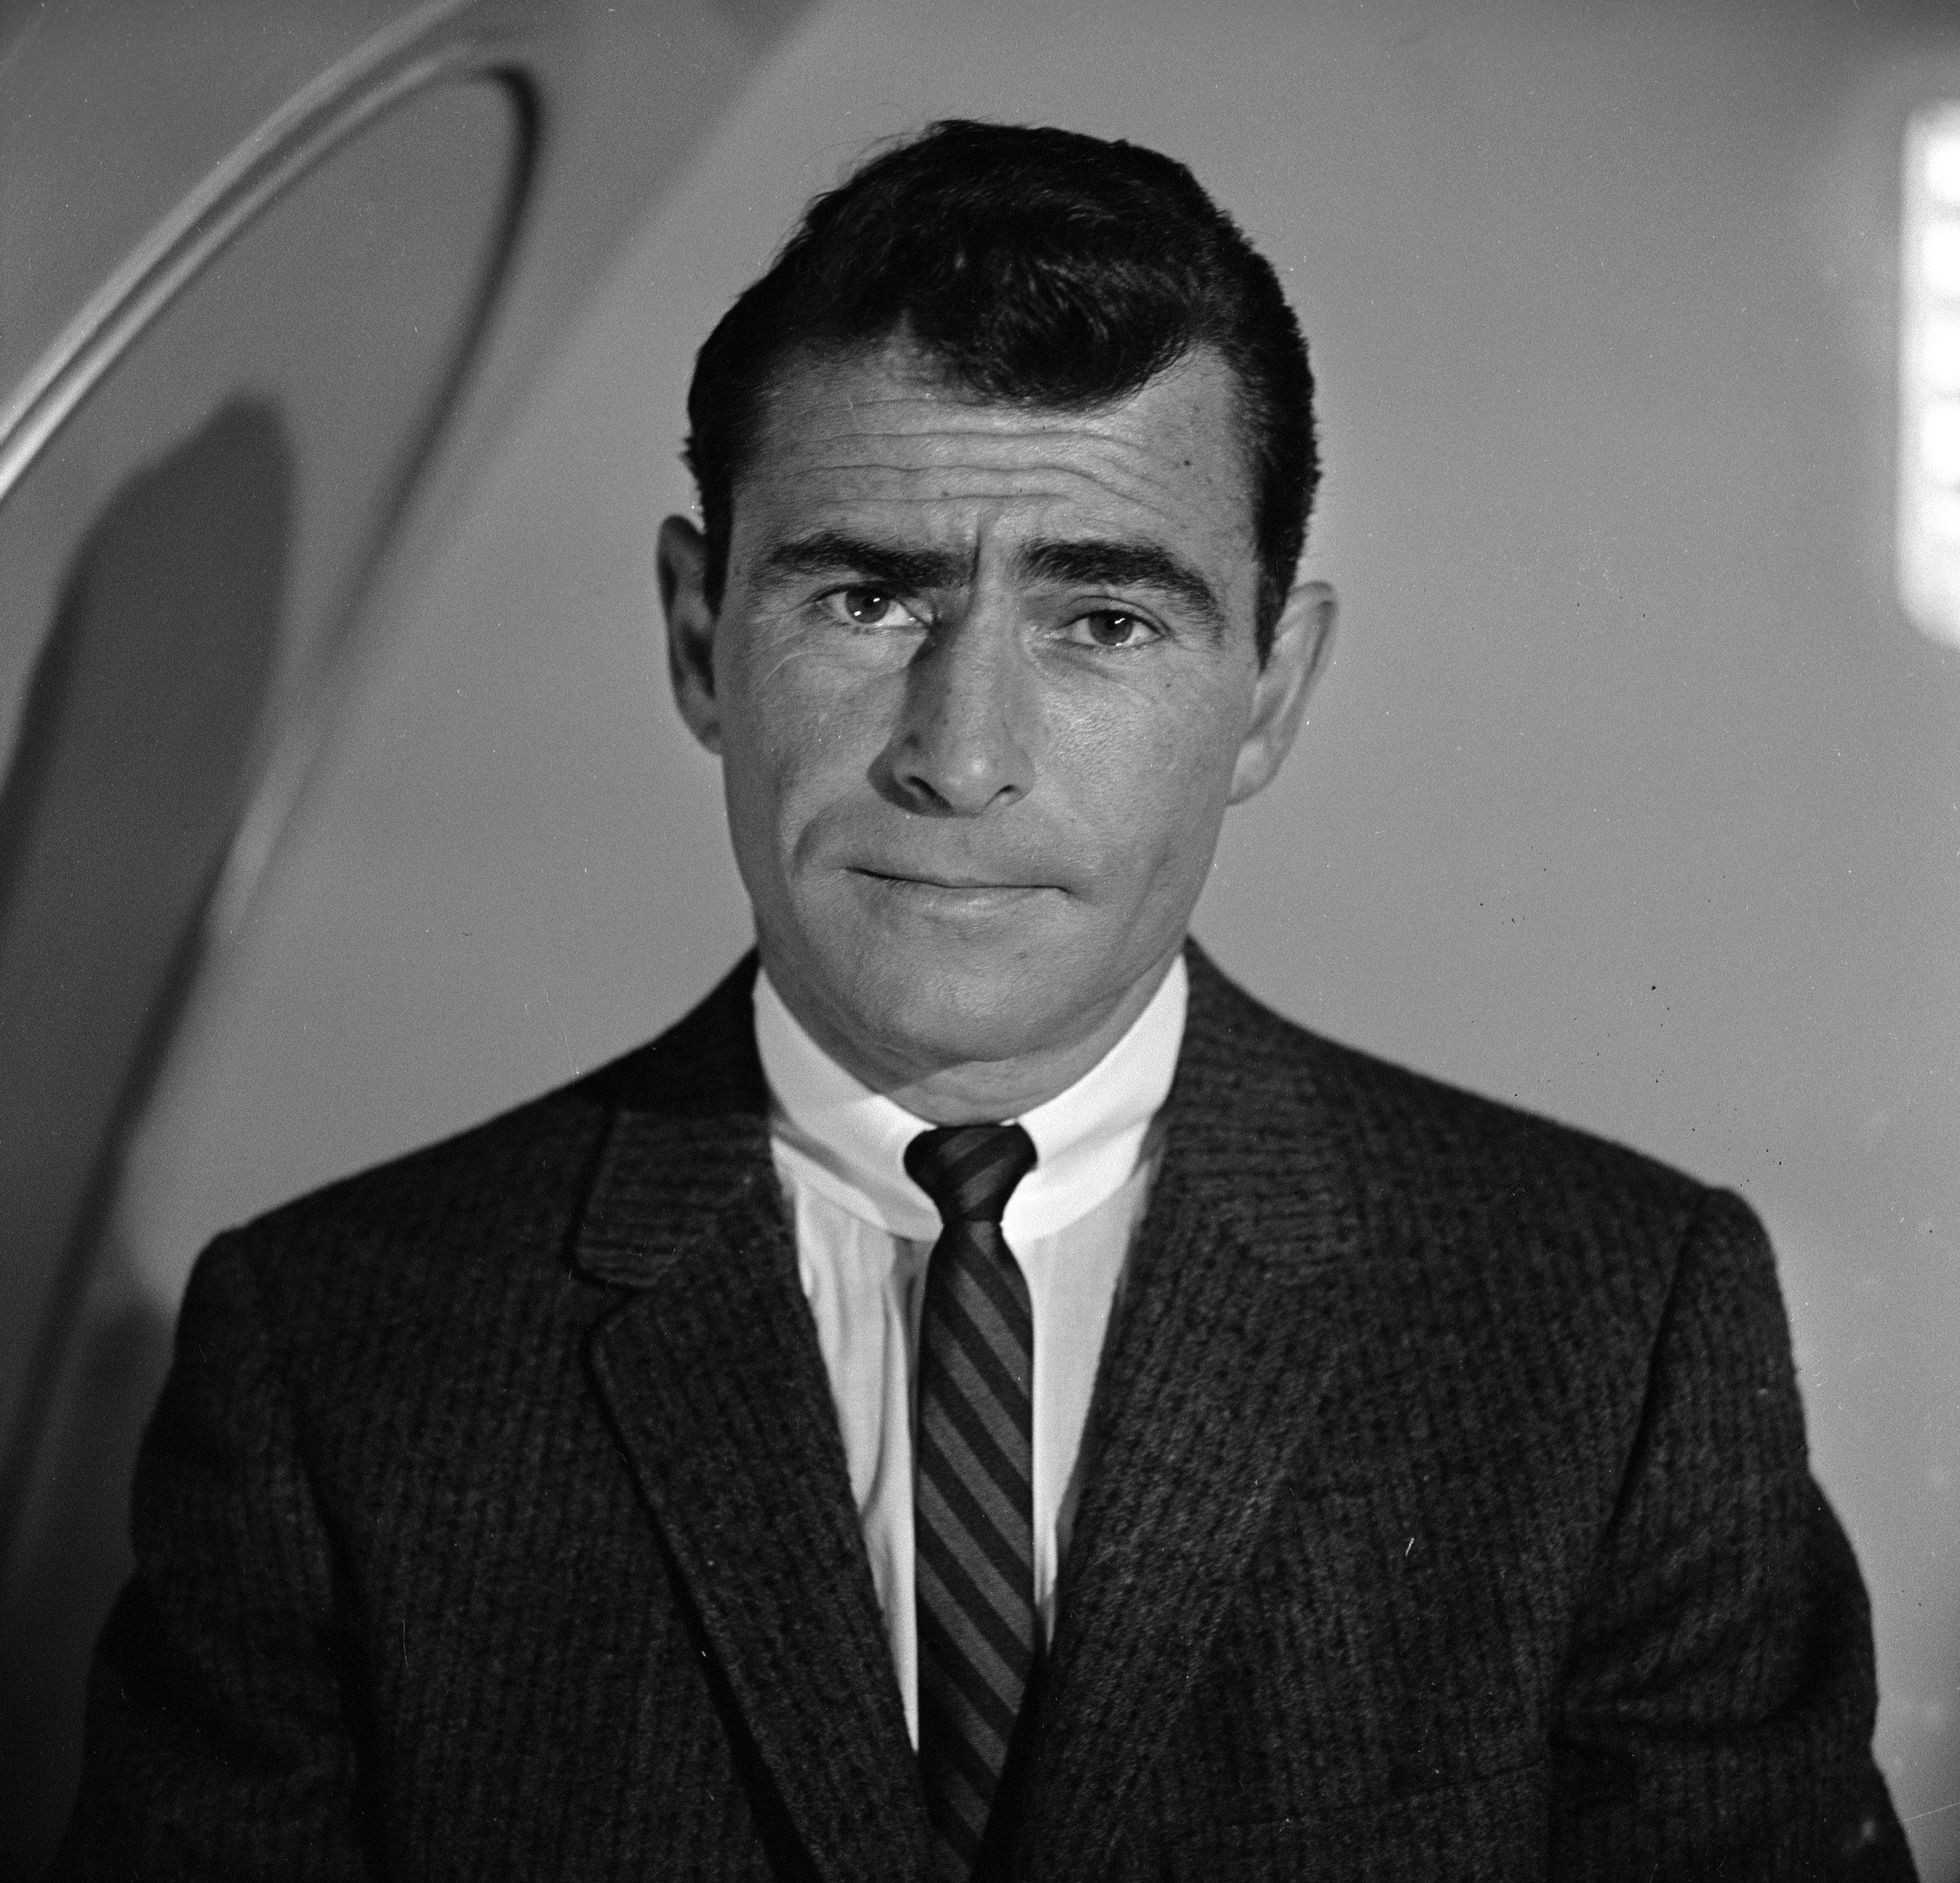 Rod Serling in a suit